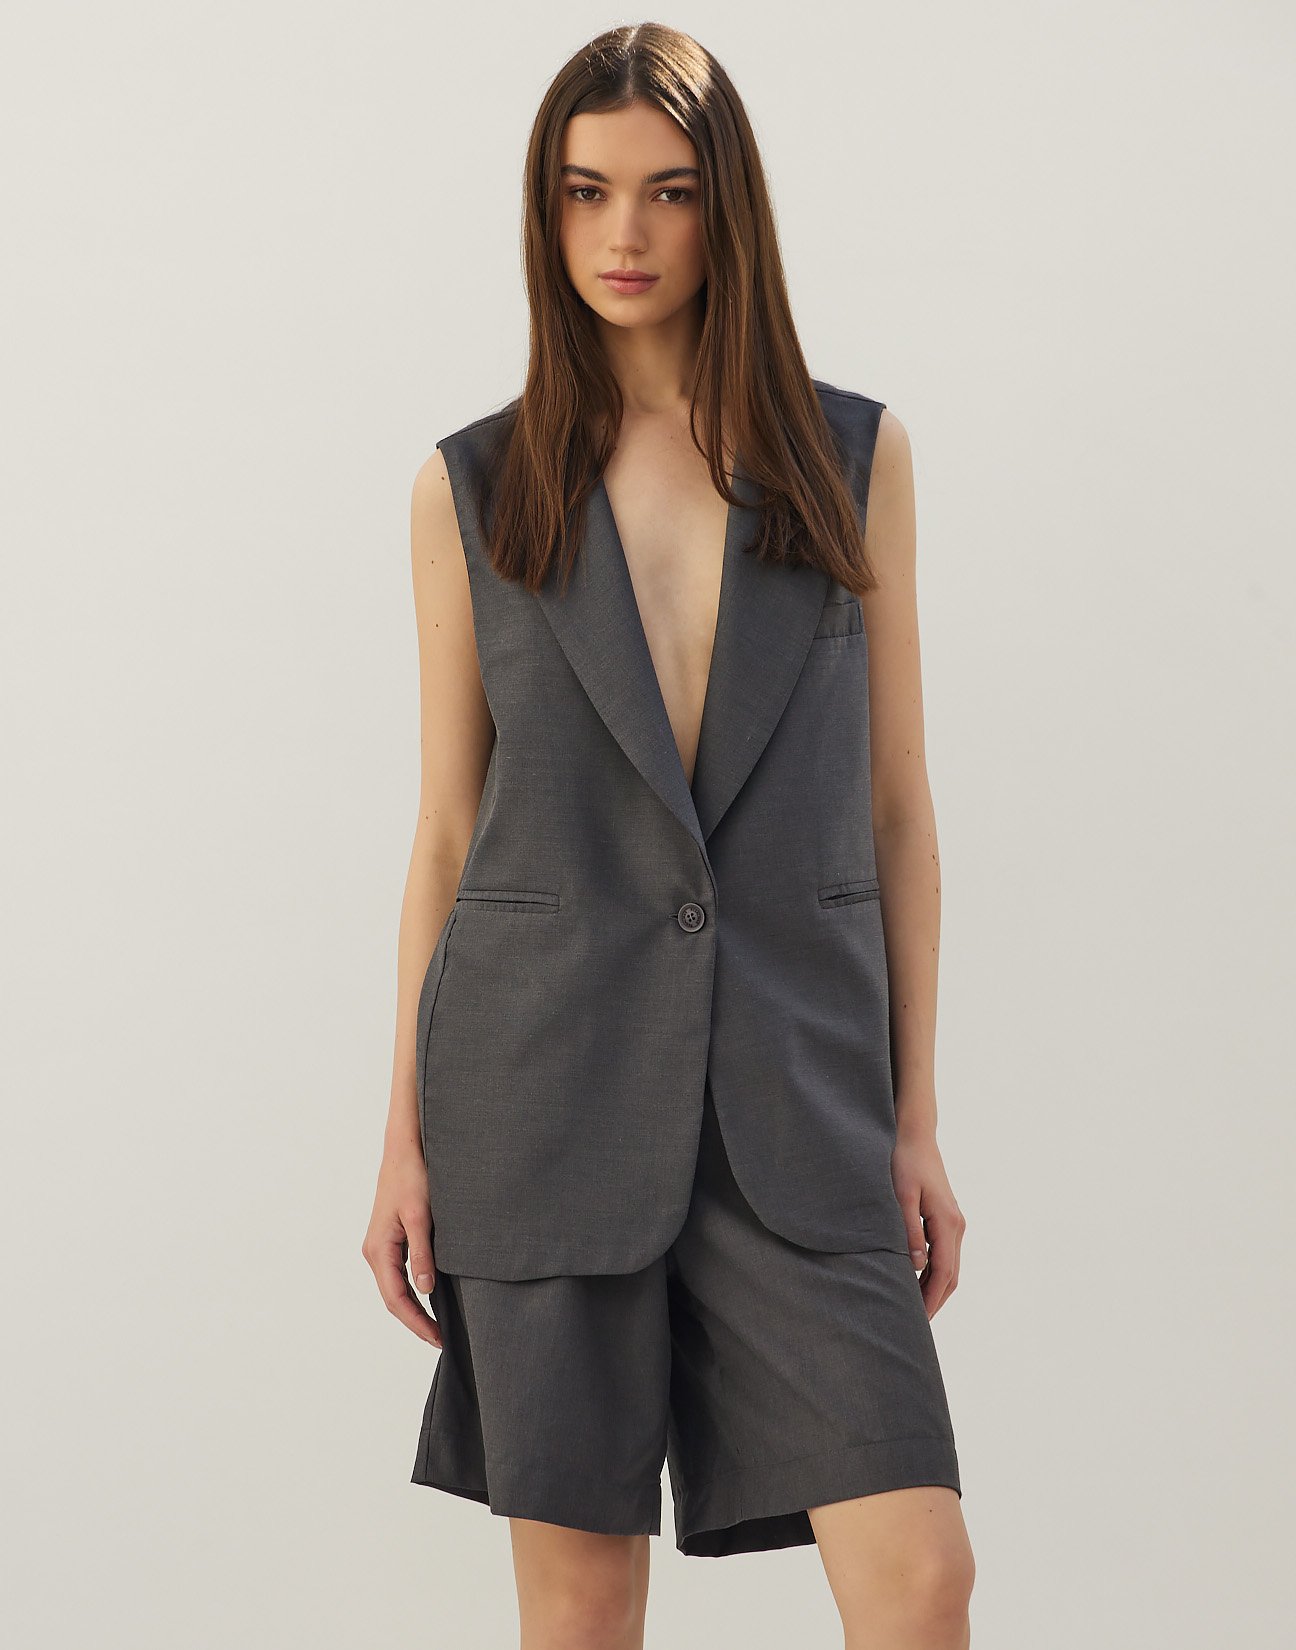 Long waistcoat with button